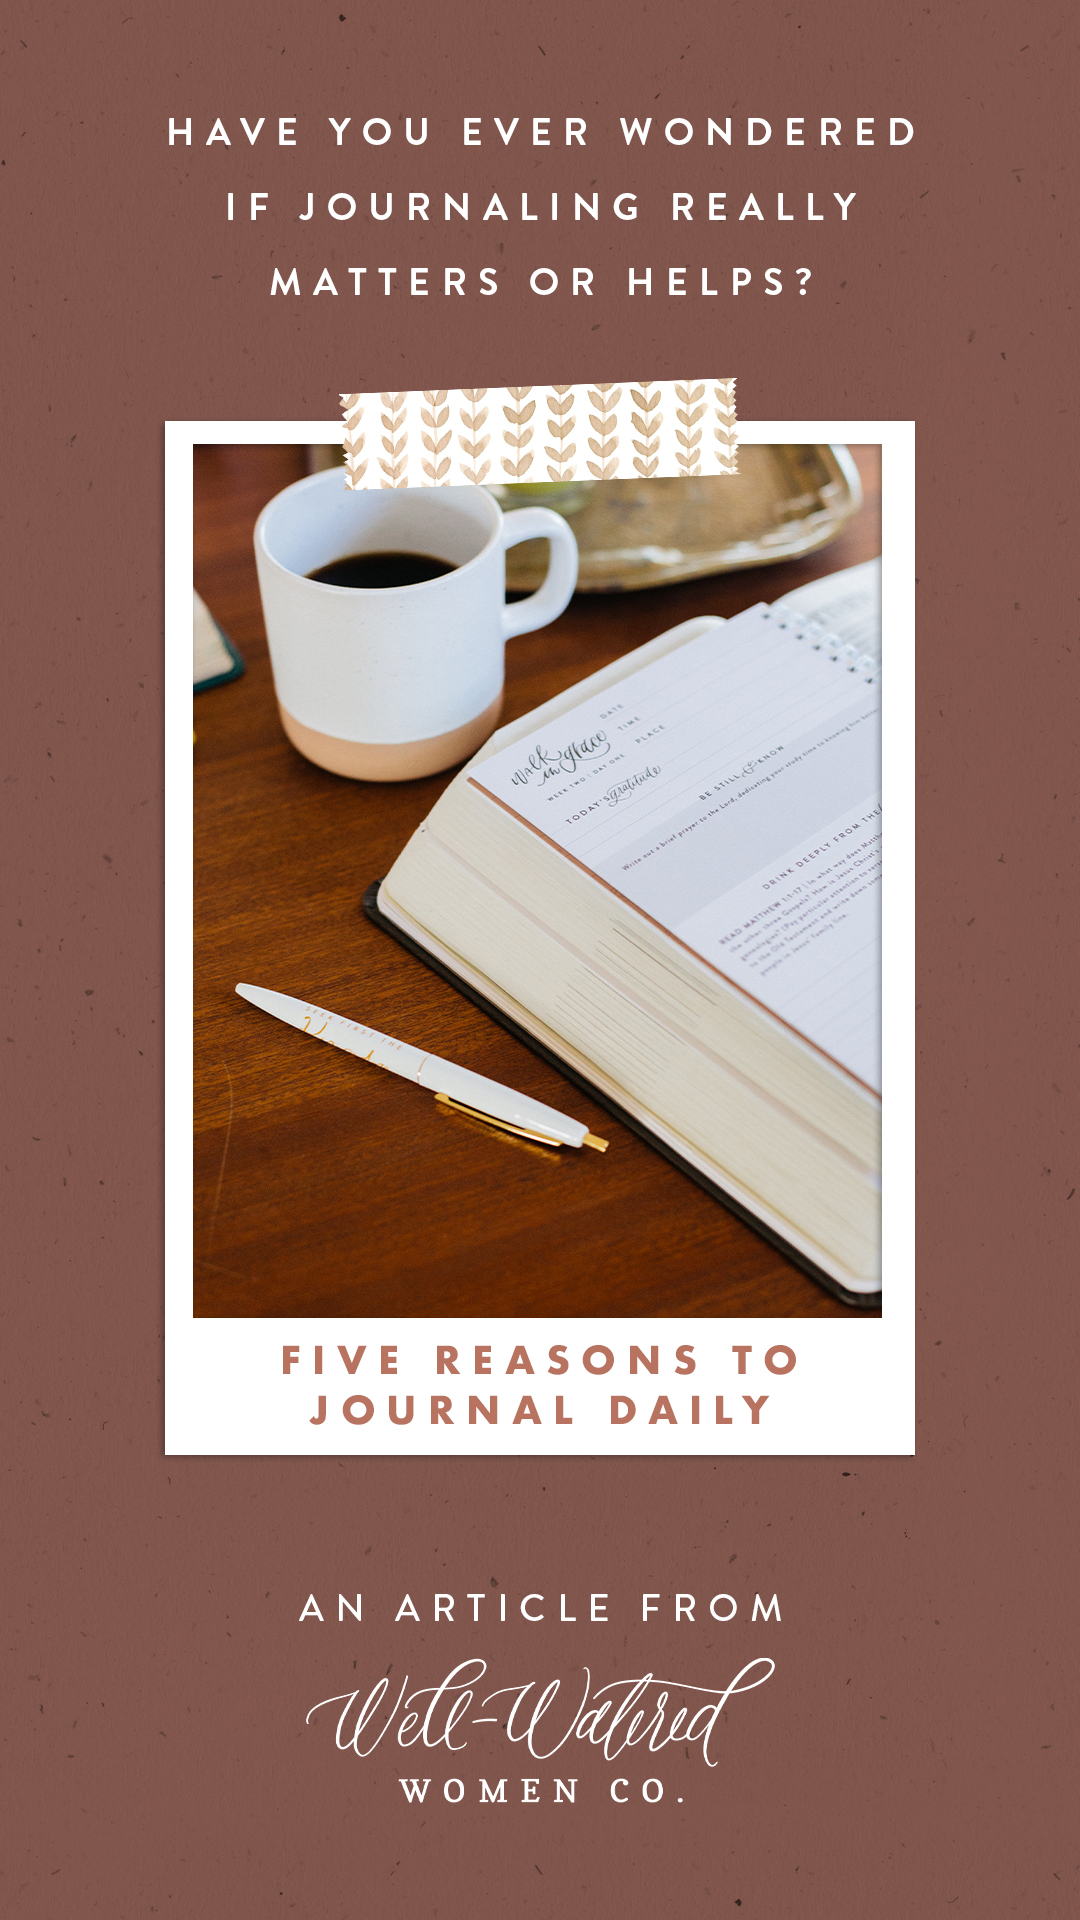 Five Reasons to Journal Daily - An Article by Well-Watered Women